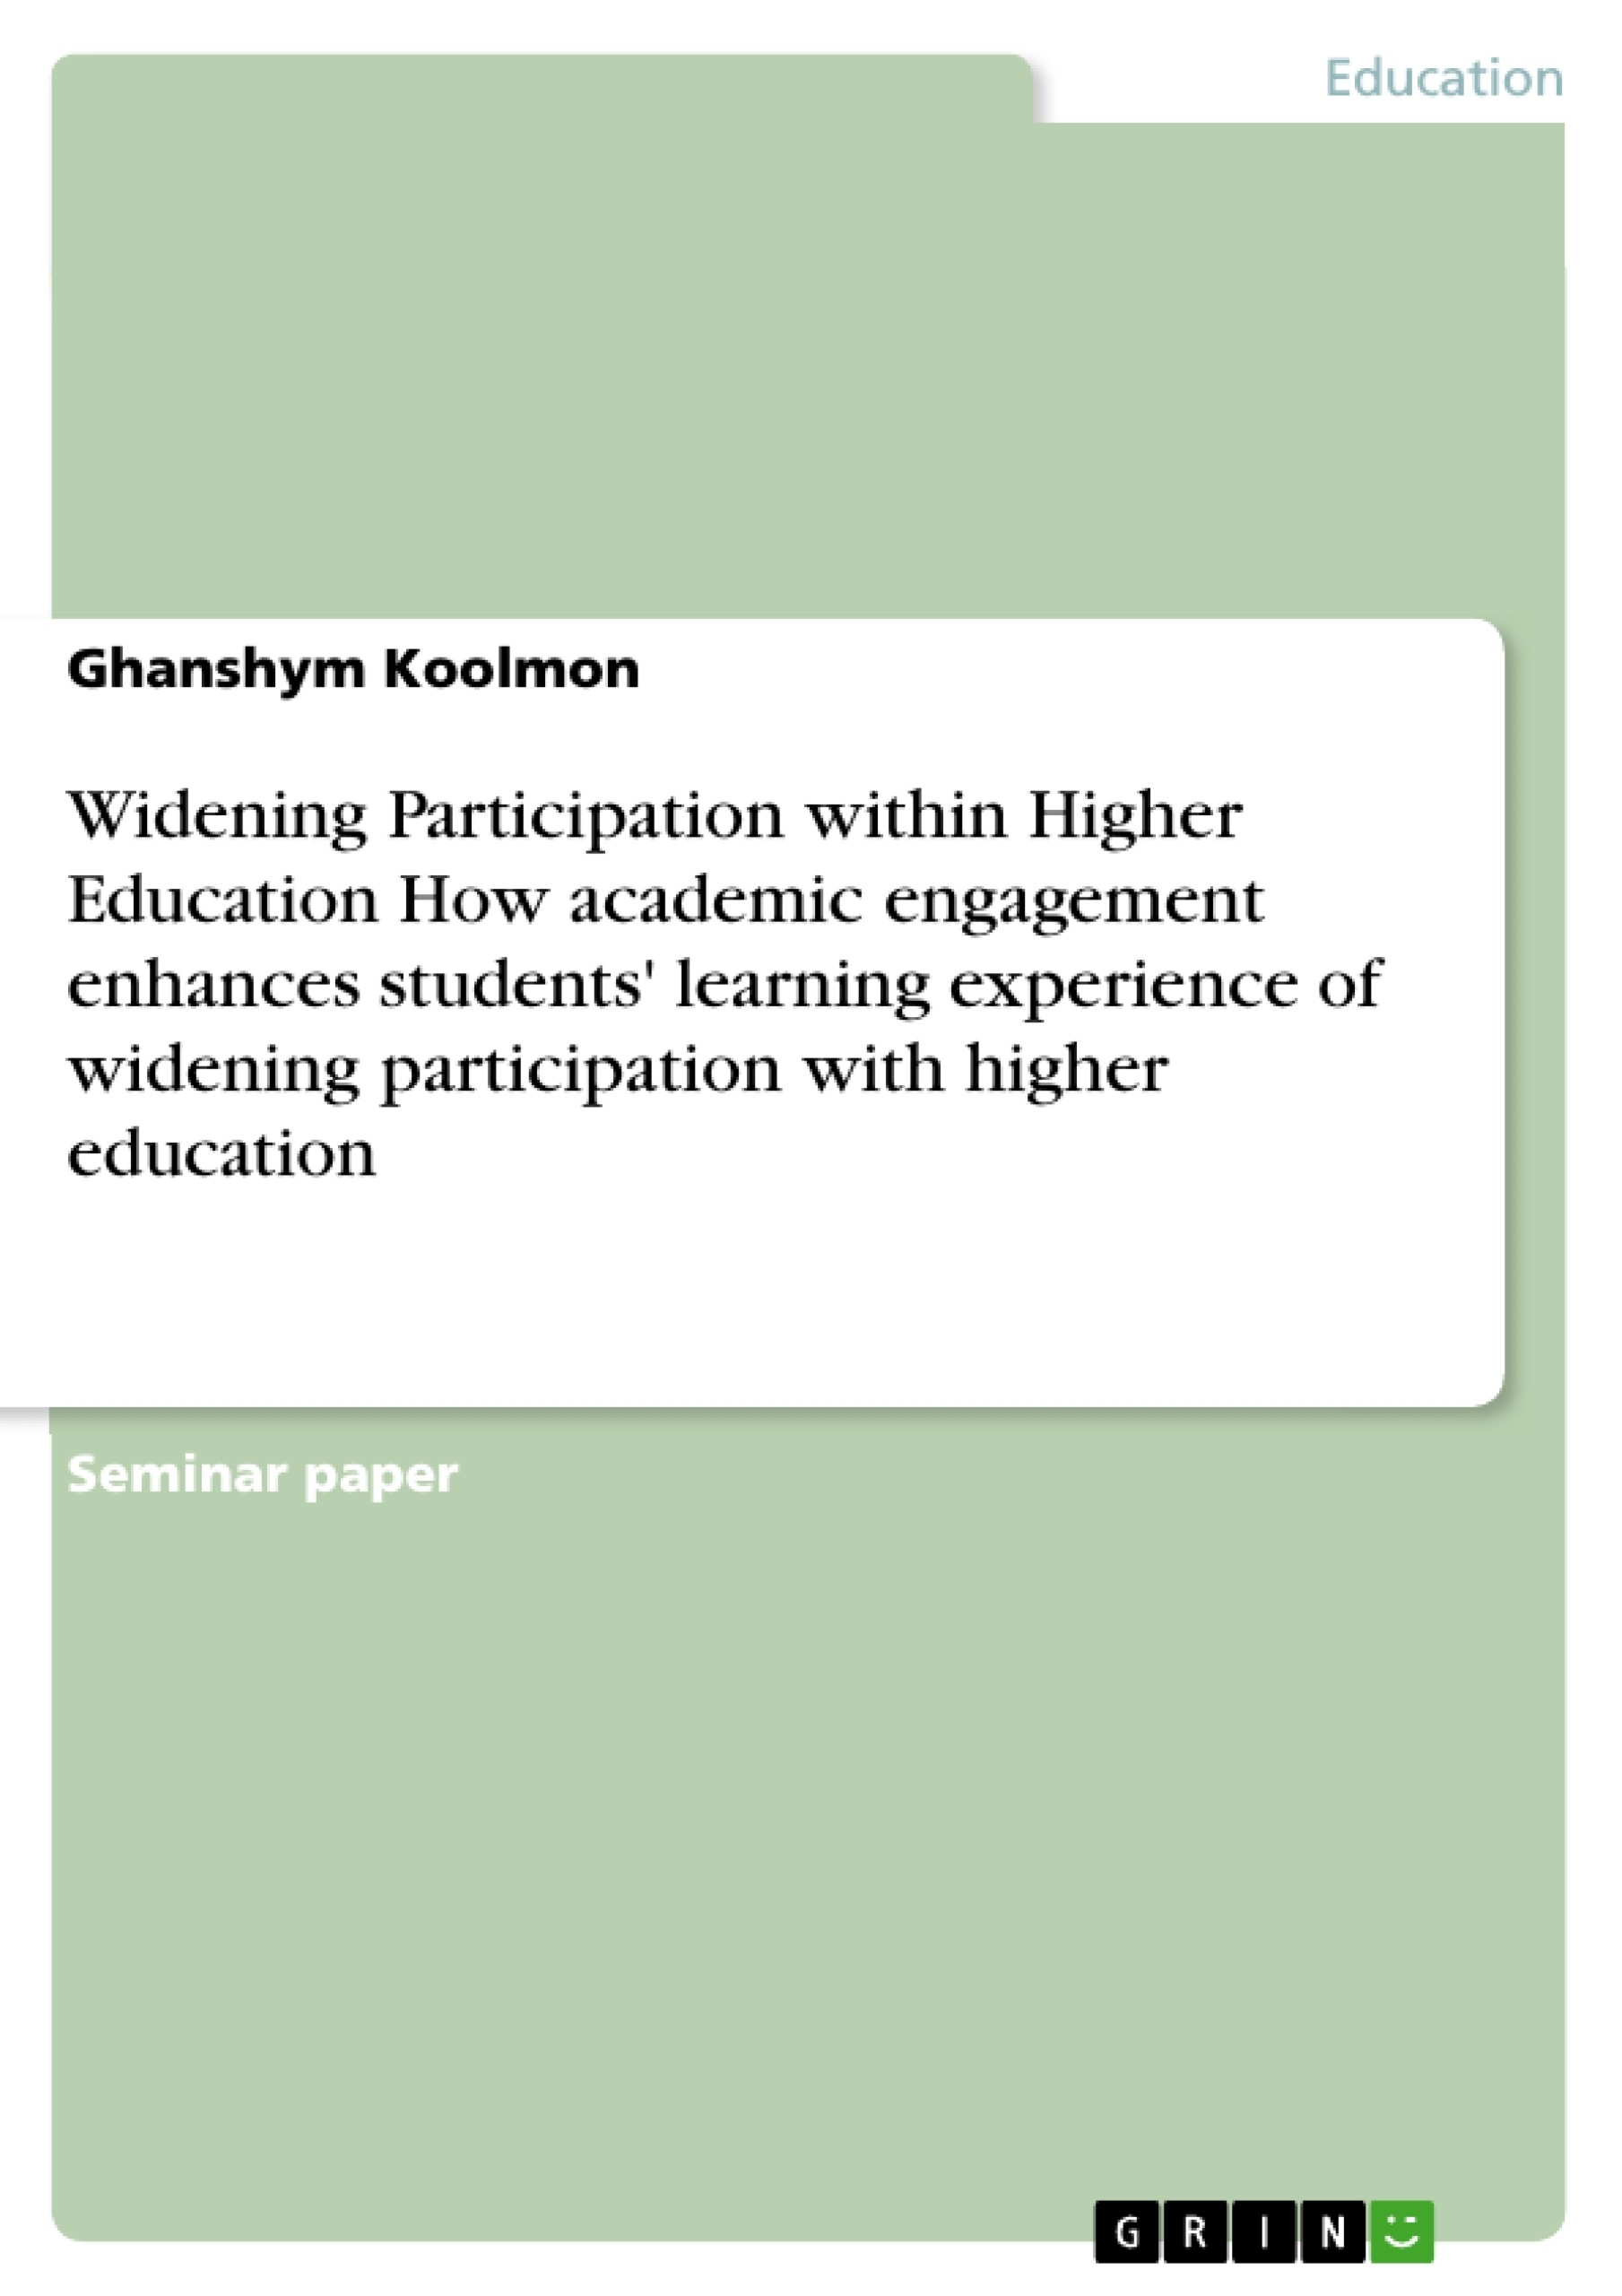 Título: Widening Participation within Higher Education  How academic engagement enhances students' learning experience of widening participation with higher education